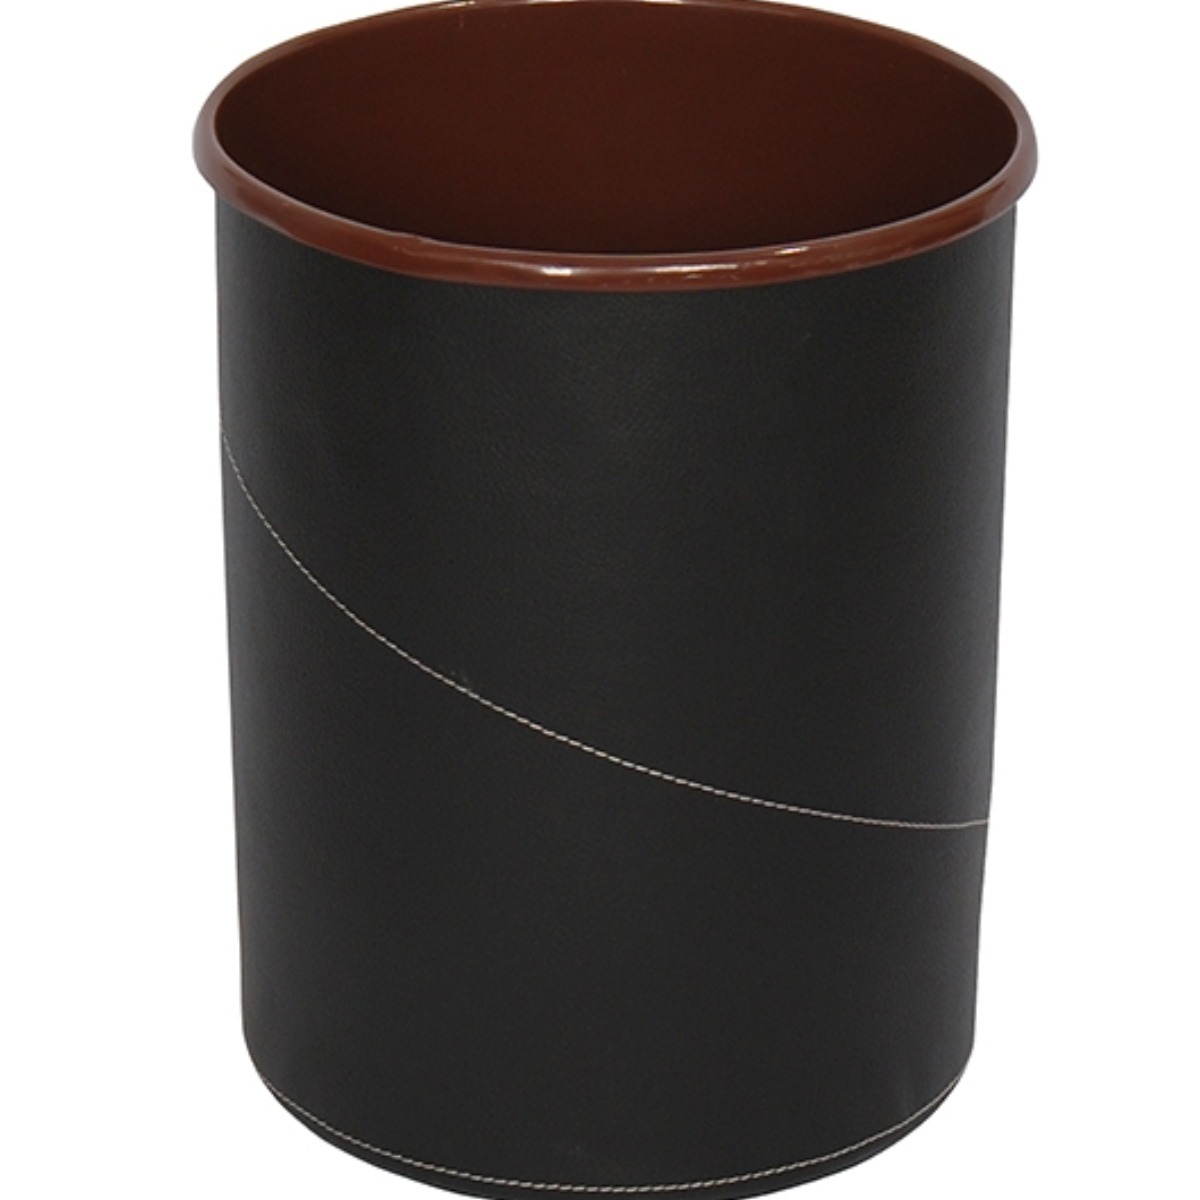 AB-307 Leather Lined Dustbin